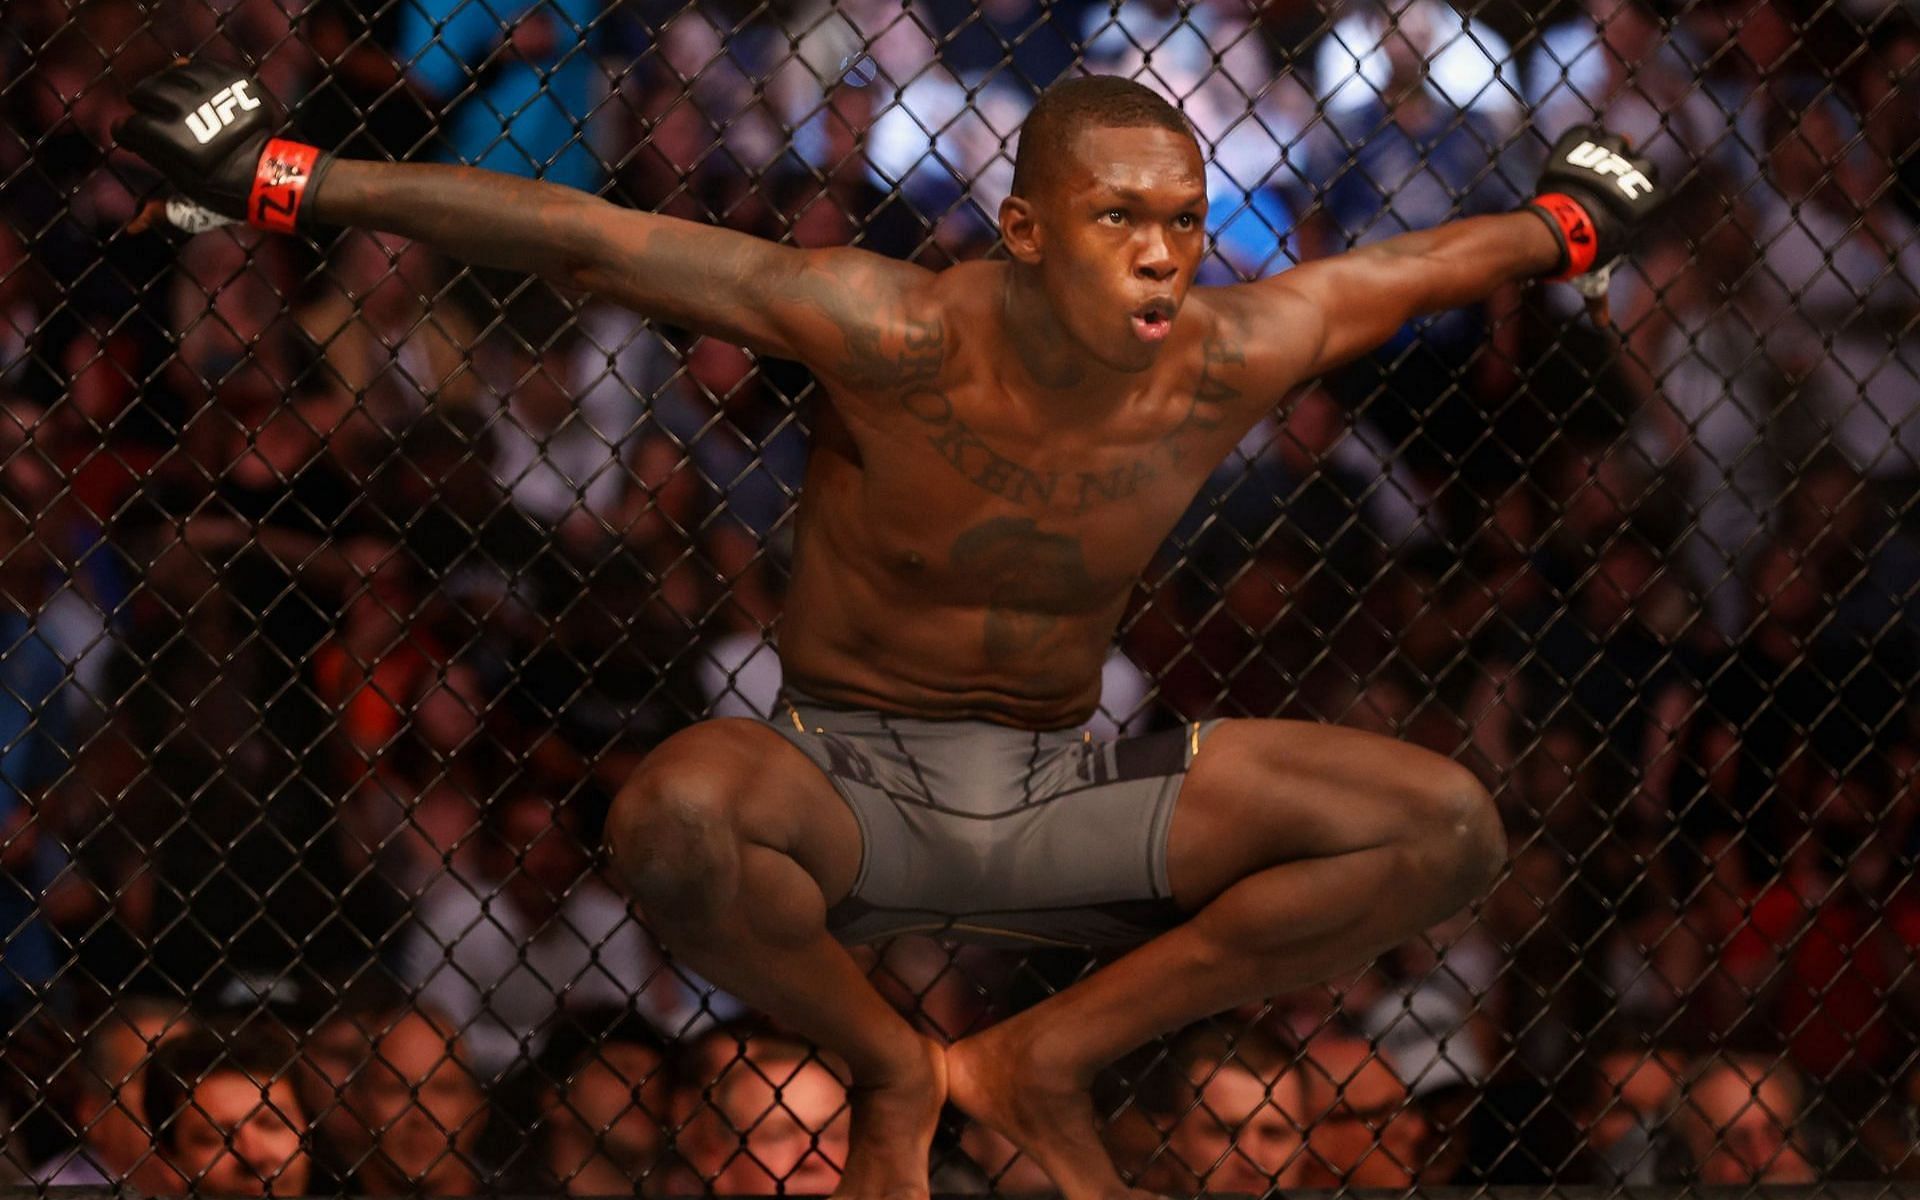 Israel Adesanya releases an exclusive interview heading into UFC 271